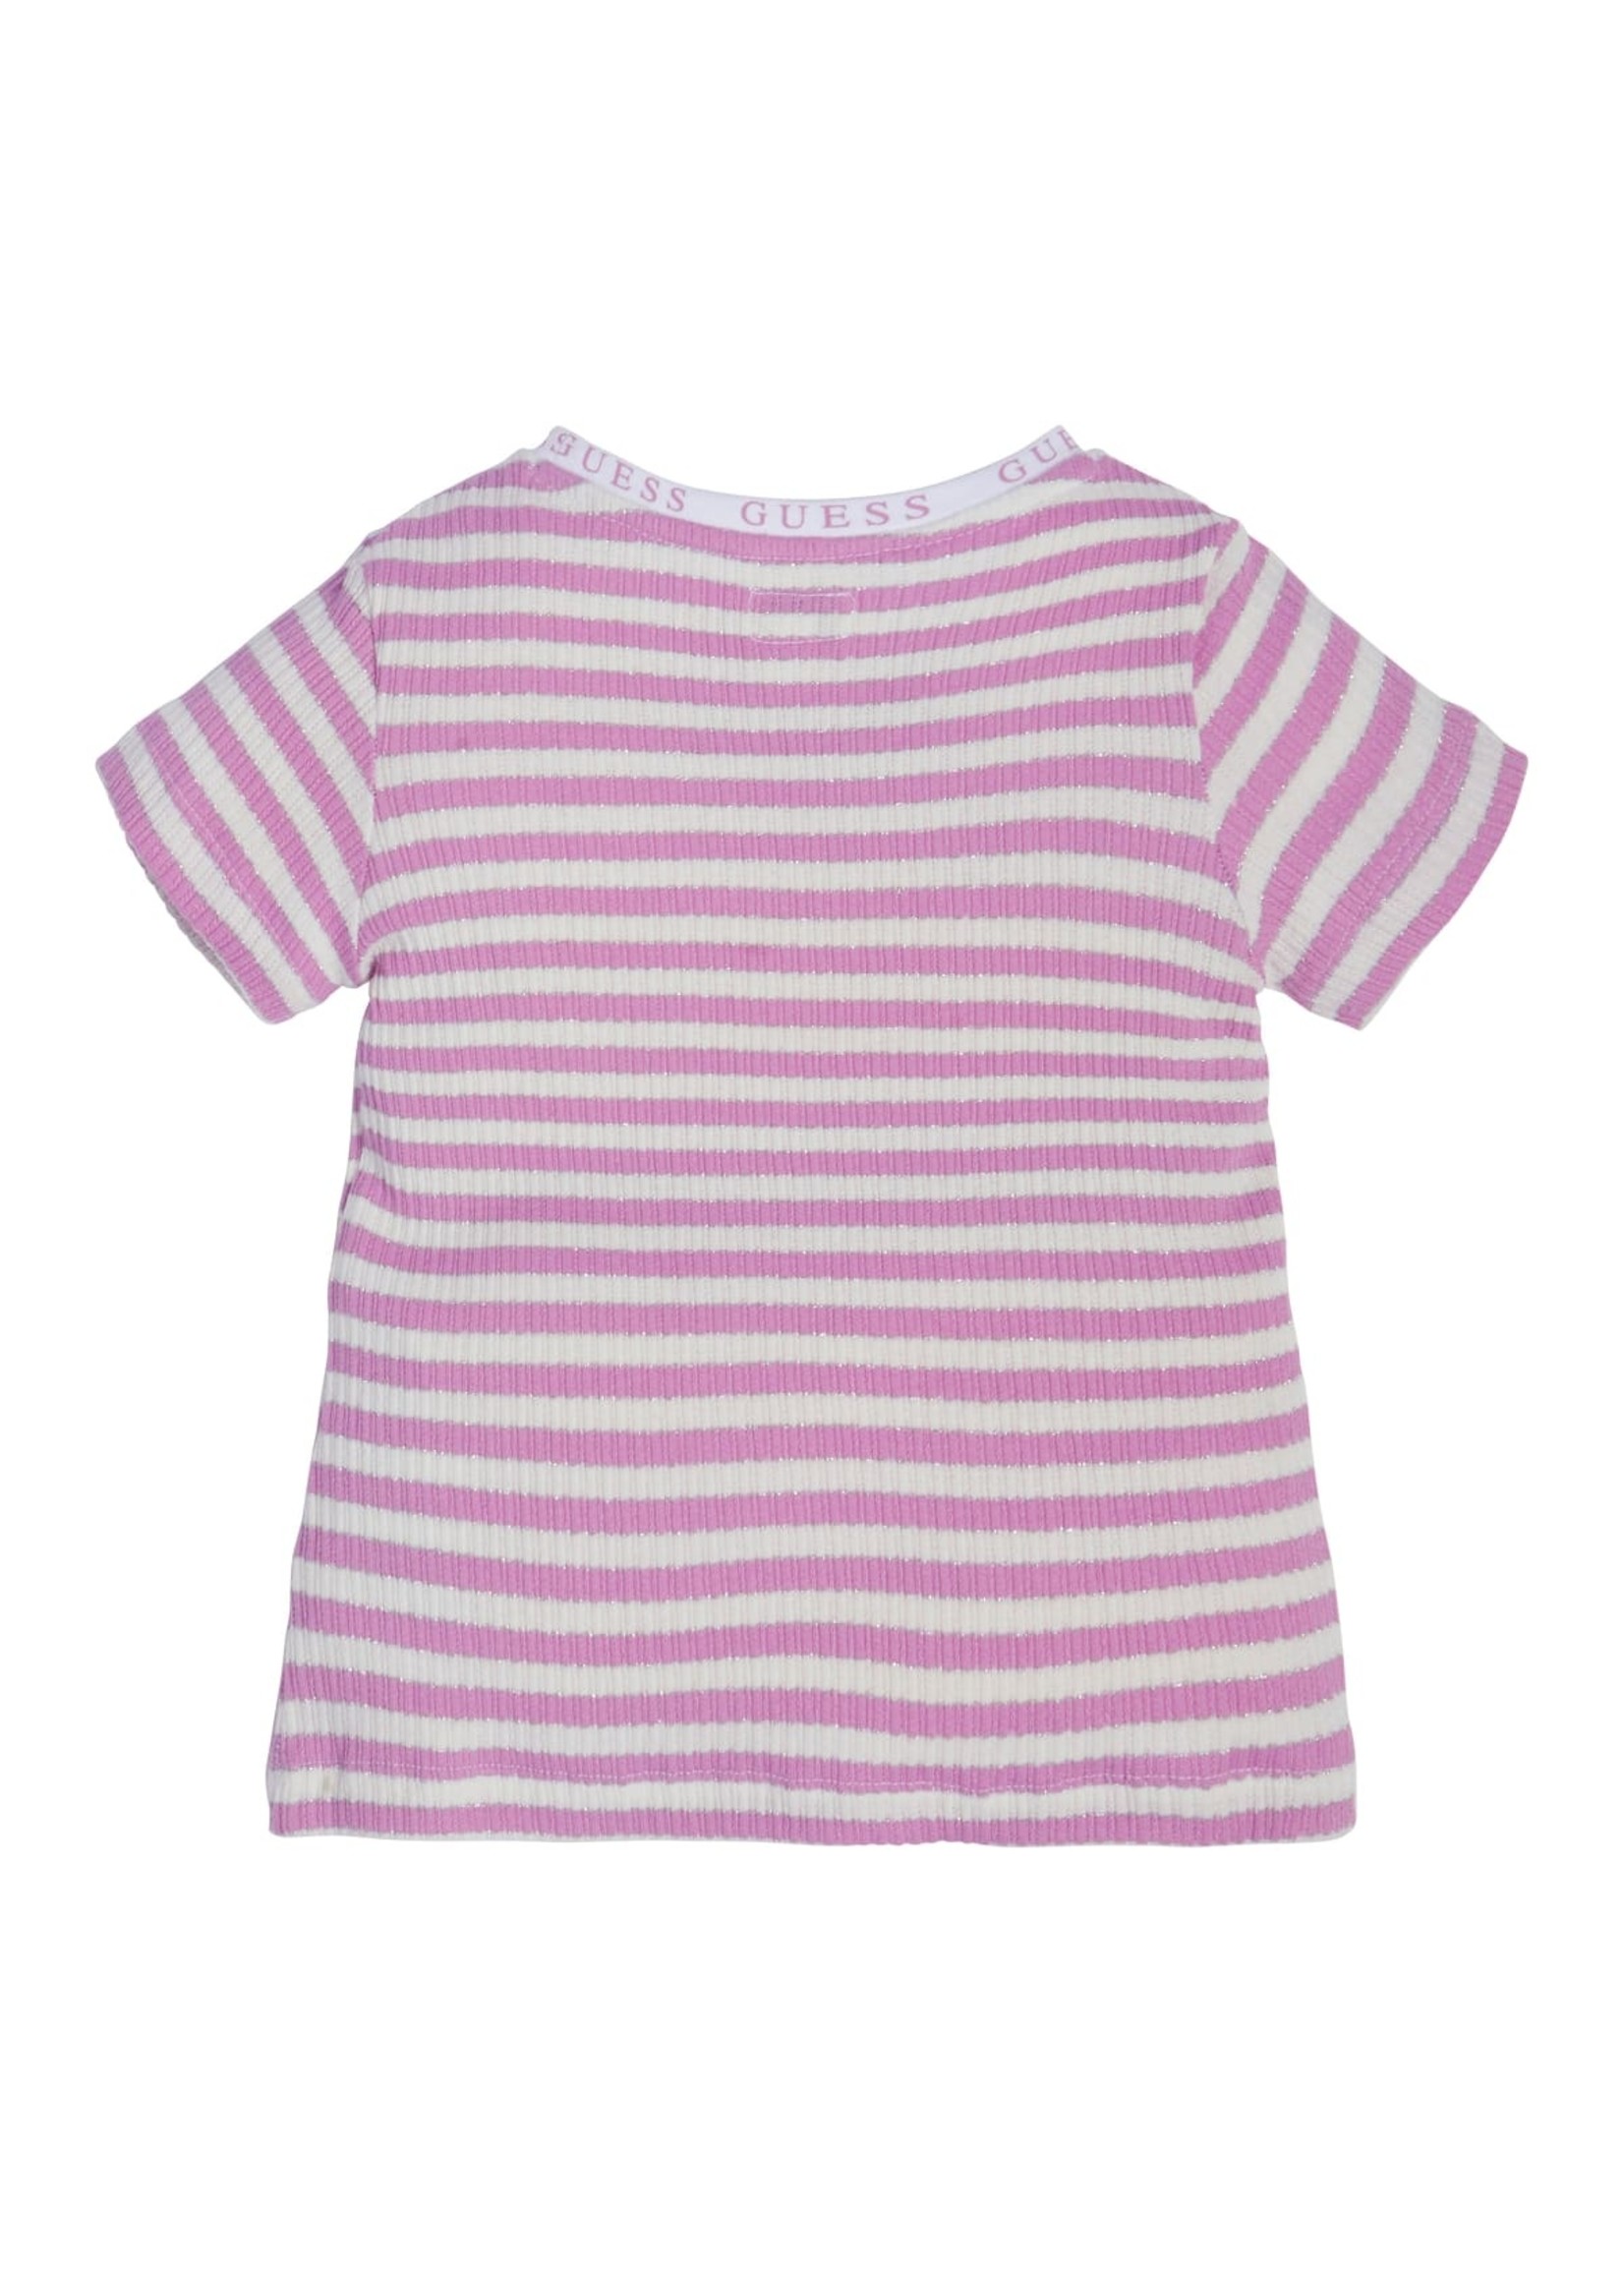 Guess SS T-SHIRT PINK AND WHITE STRIP